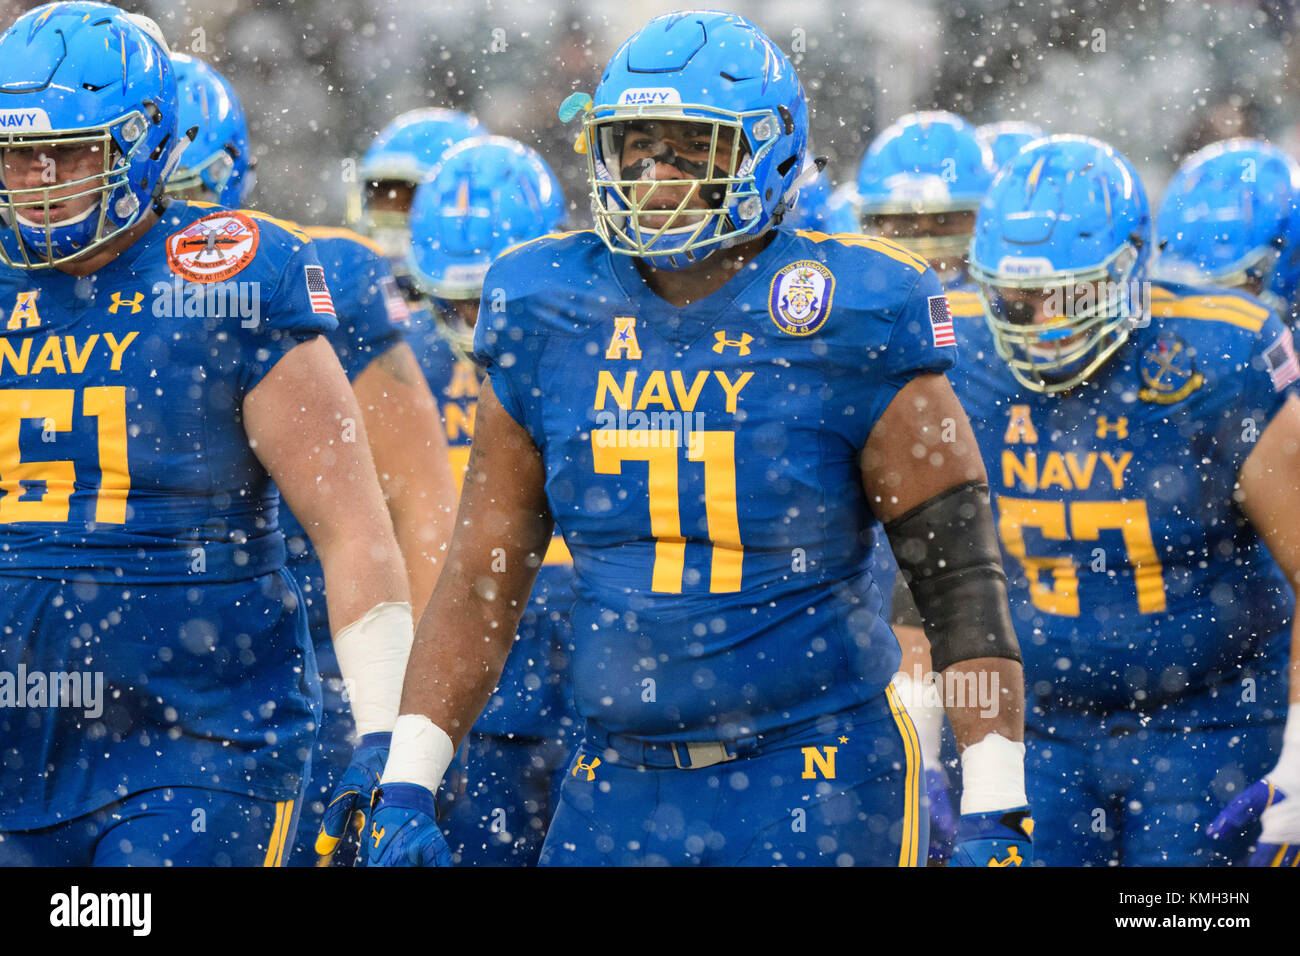 Philadelphia, PA, USA. 09th Dec, 2017. Navy Midshipmen guard Evan Martin (71) and Navy Midshipmen offensive tackle Andrew Wood (61) look on through the snow during the 118th edition of The Army-Navy game between The Army Black Knights and The Navy Midshipmen at Lincoln Financial Field in Philadelphia, PA. The Army Black Knights defeat The Navy Midshipmen 14-13. Mandatory Credit: Kostas Lymperopoulos/CSM, Credit: csm/Alamy Live News Stock Photo